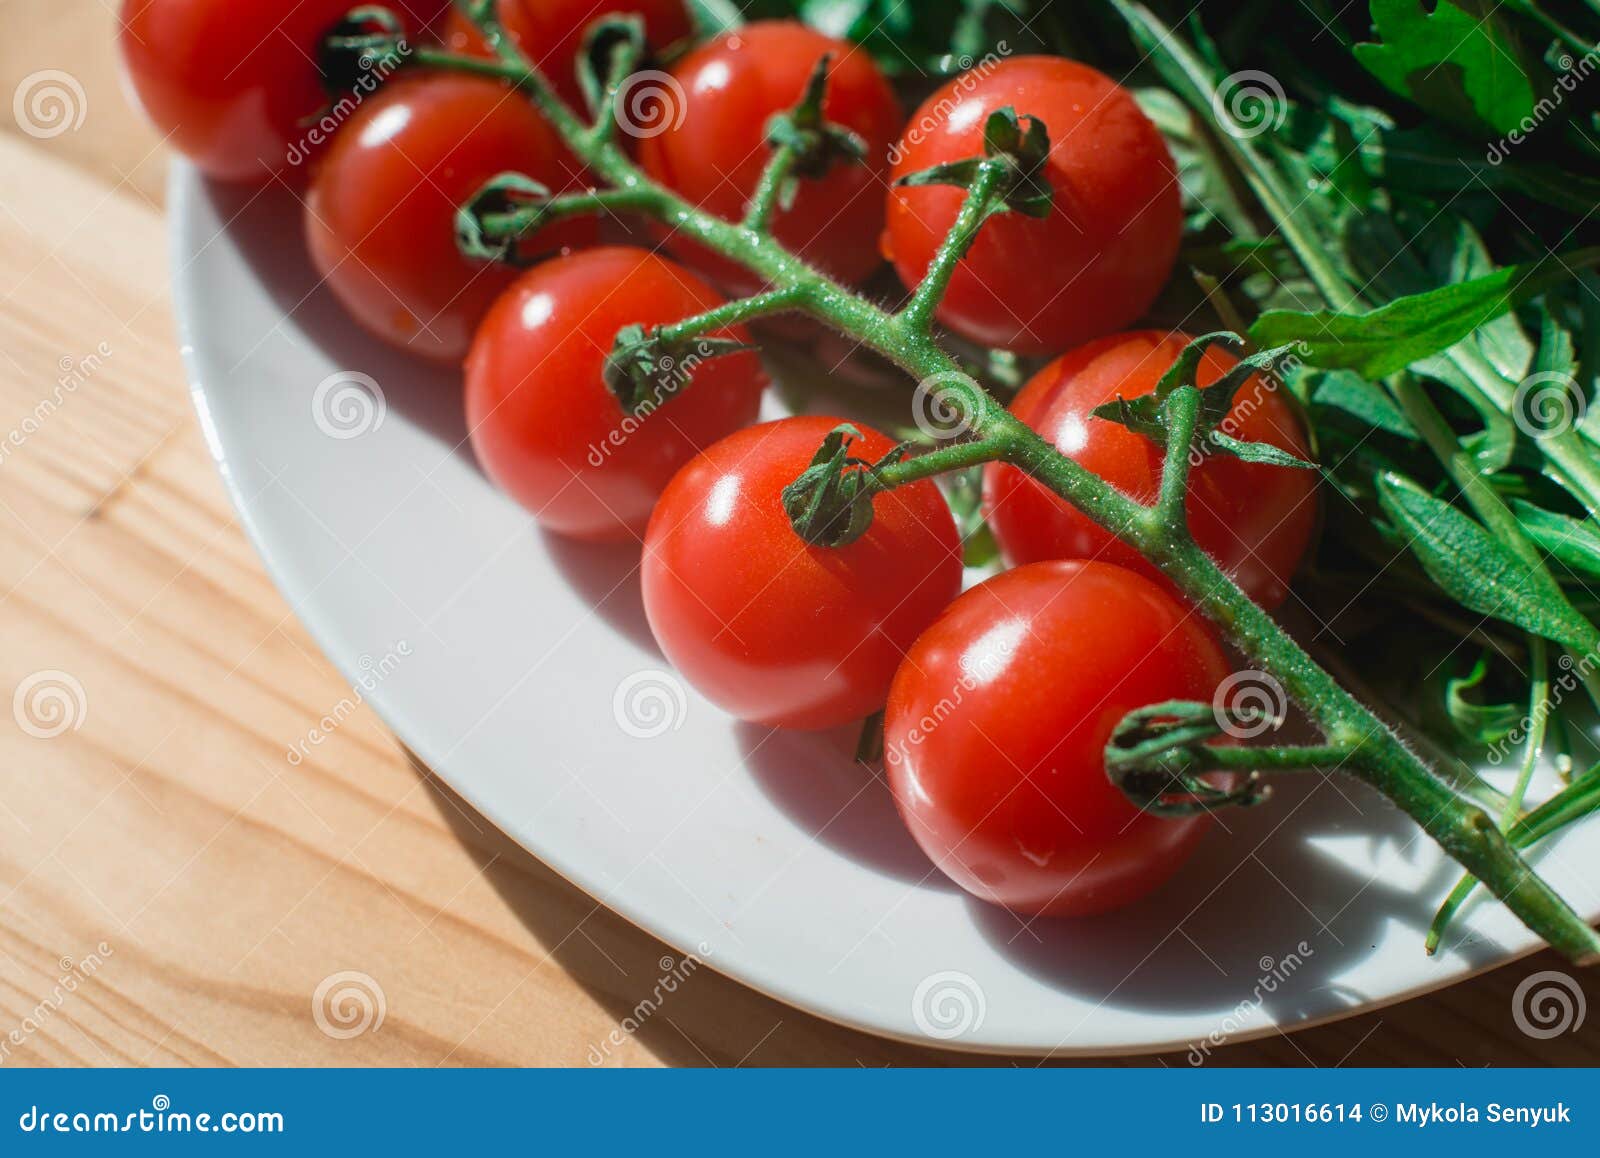 Whole Tomato Cherry and Fresh Leaves Composition on a White Plate on the Wooden Table Stock Photo - Image pesto, isolated: 113016614